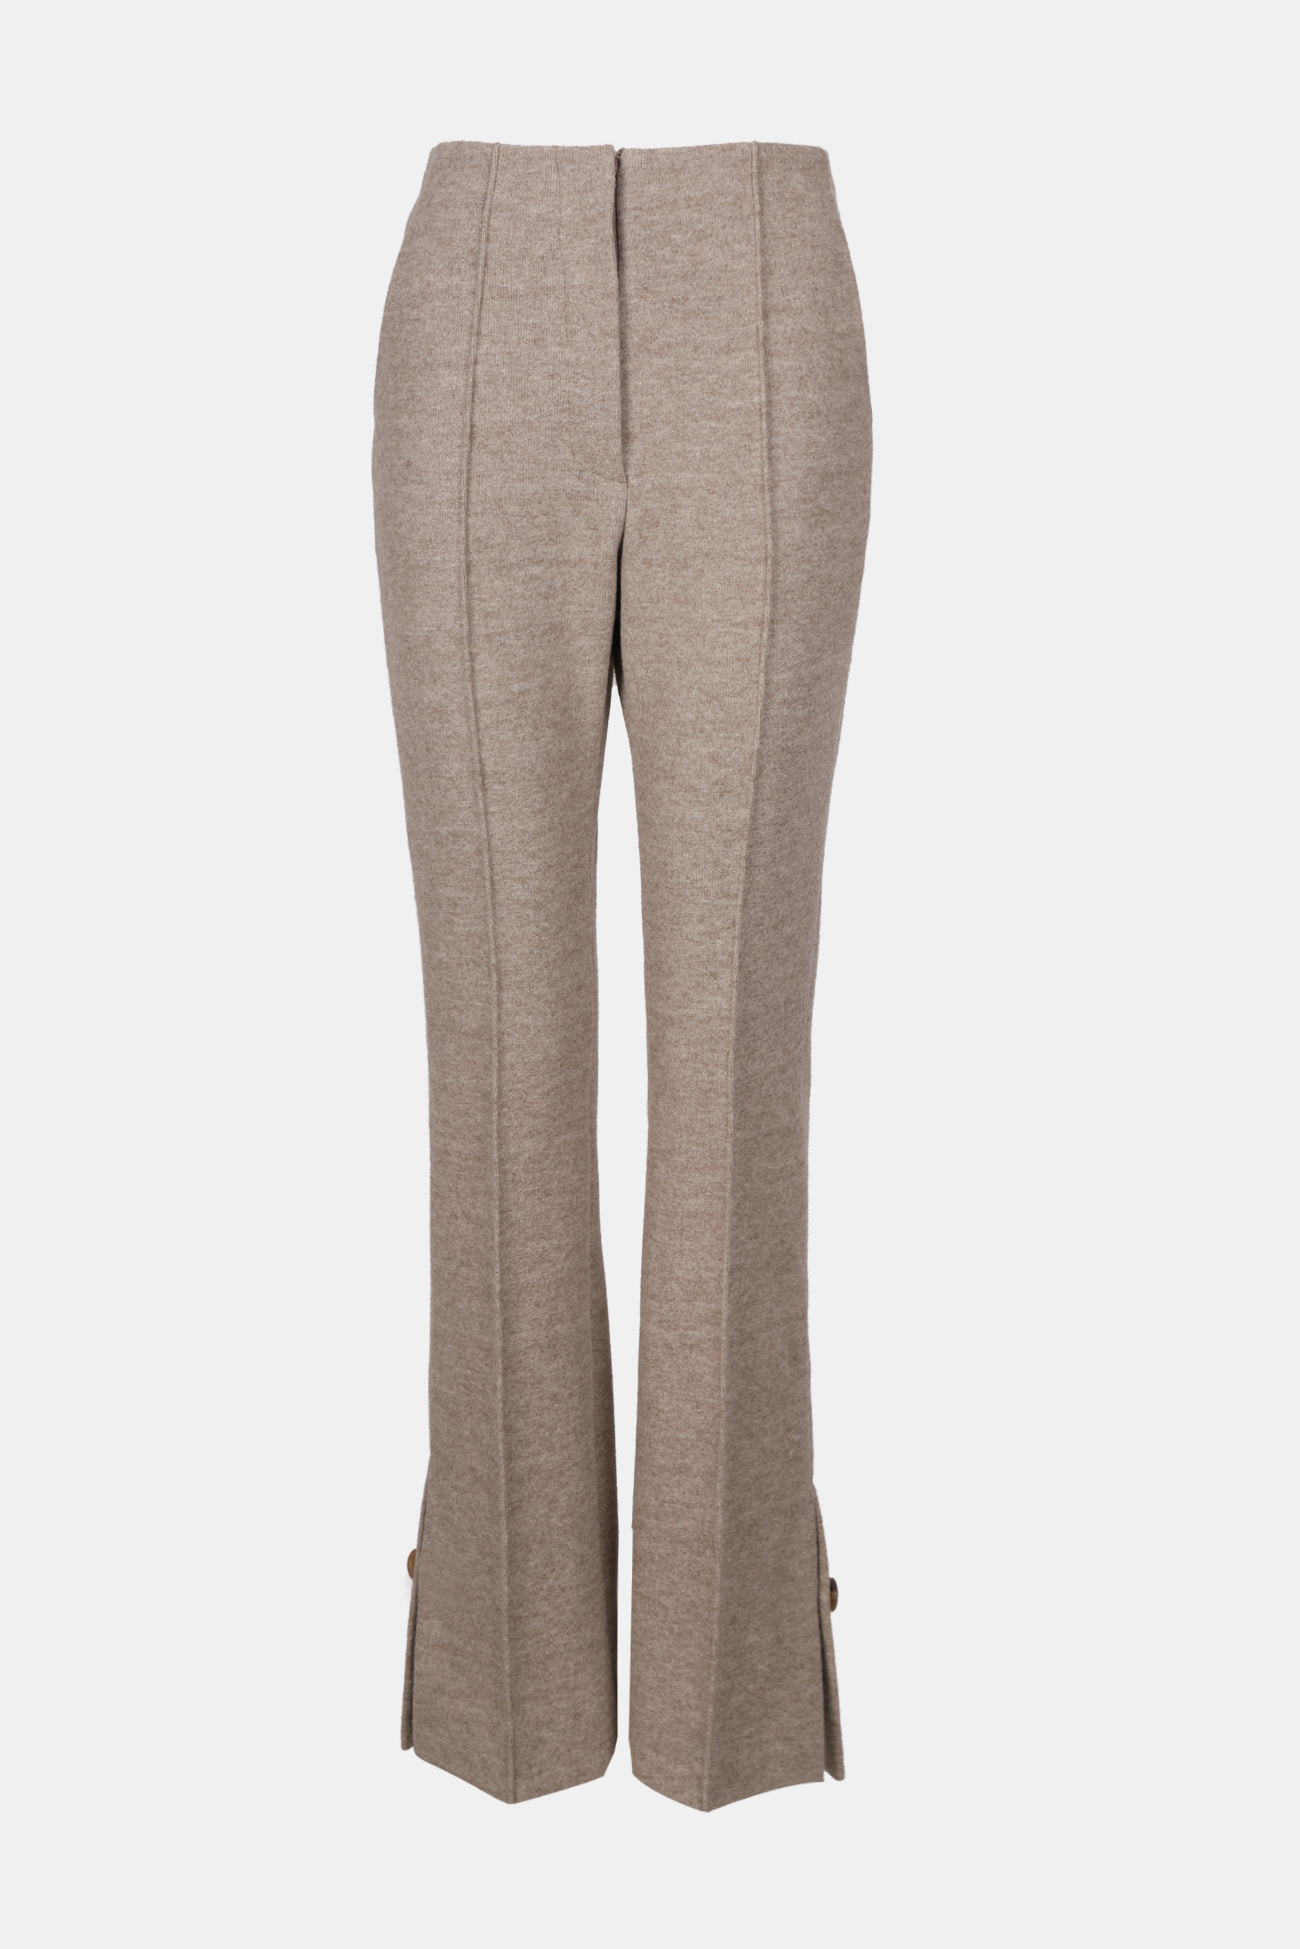 HIGH QUALITY LINE - CASHMERE TEXTURED PANTS 2021